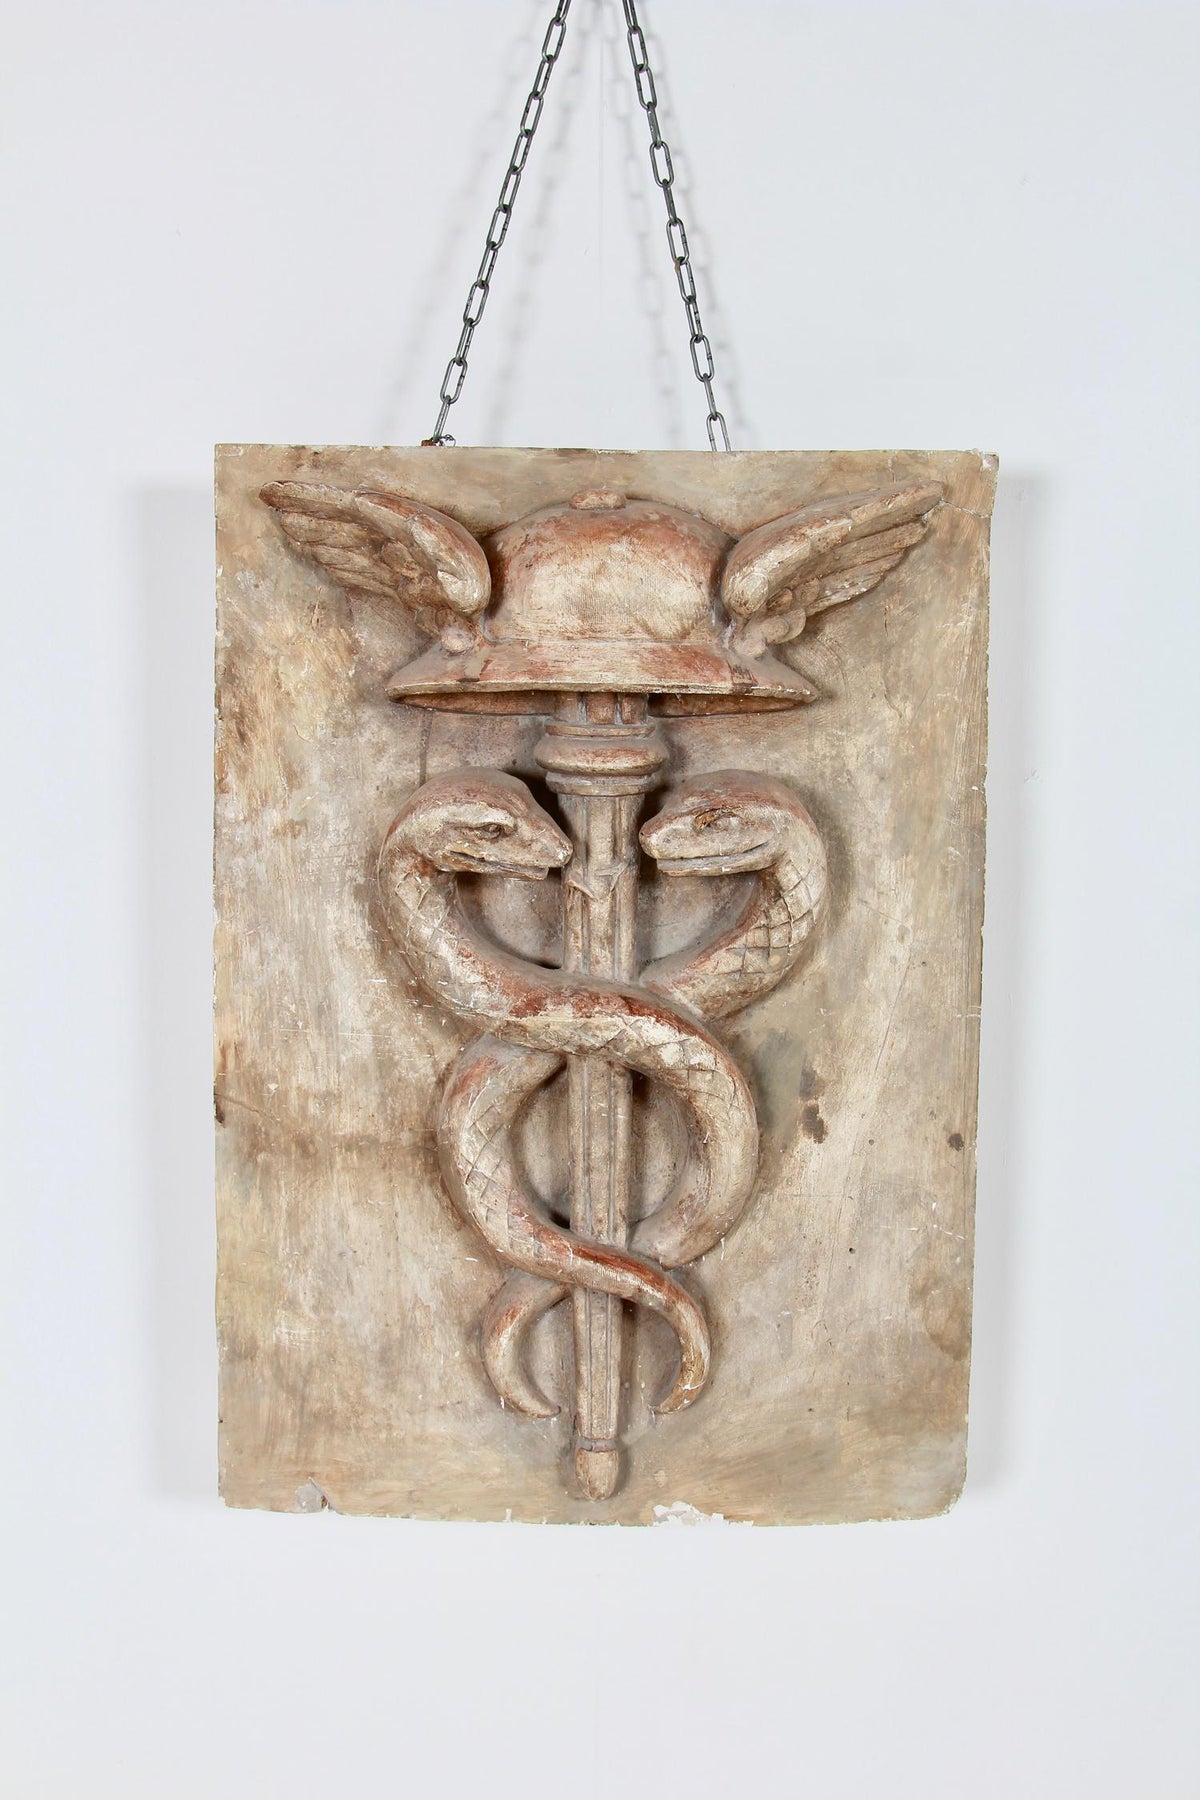 Decorative French Caduceus Plaster Plaque Hermes and Snakes